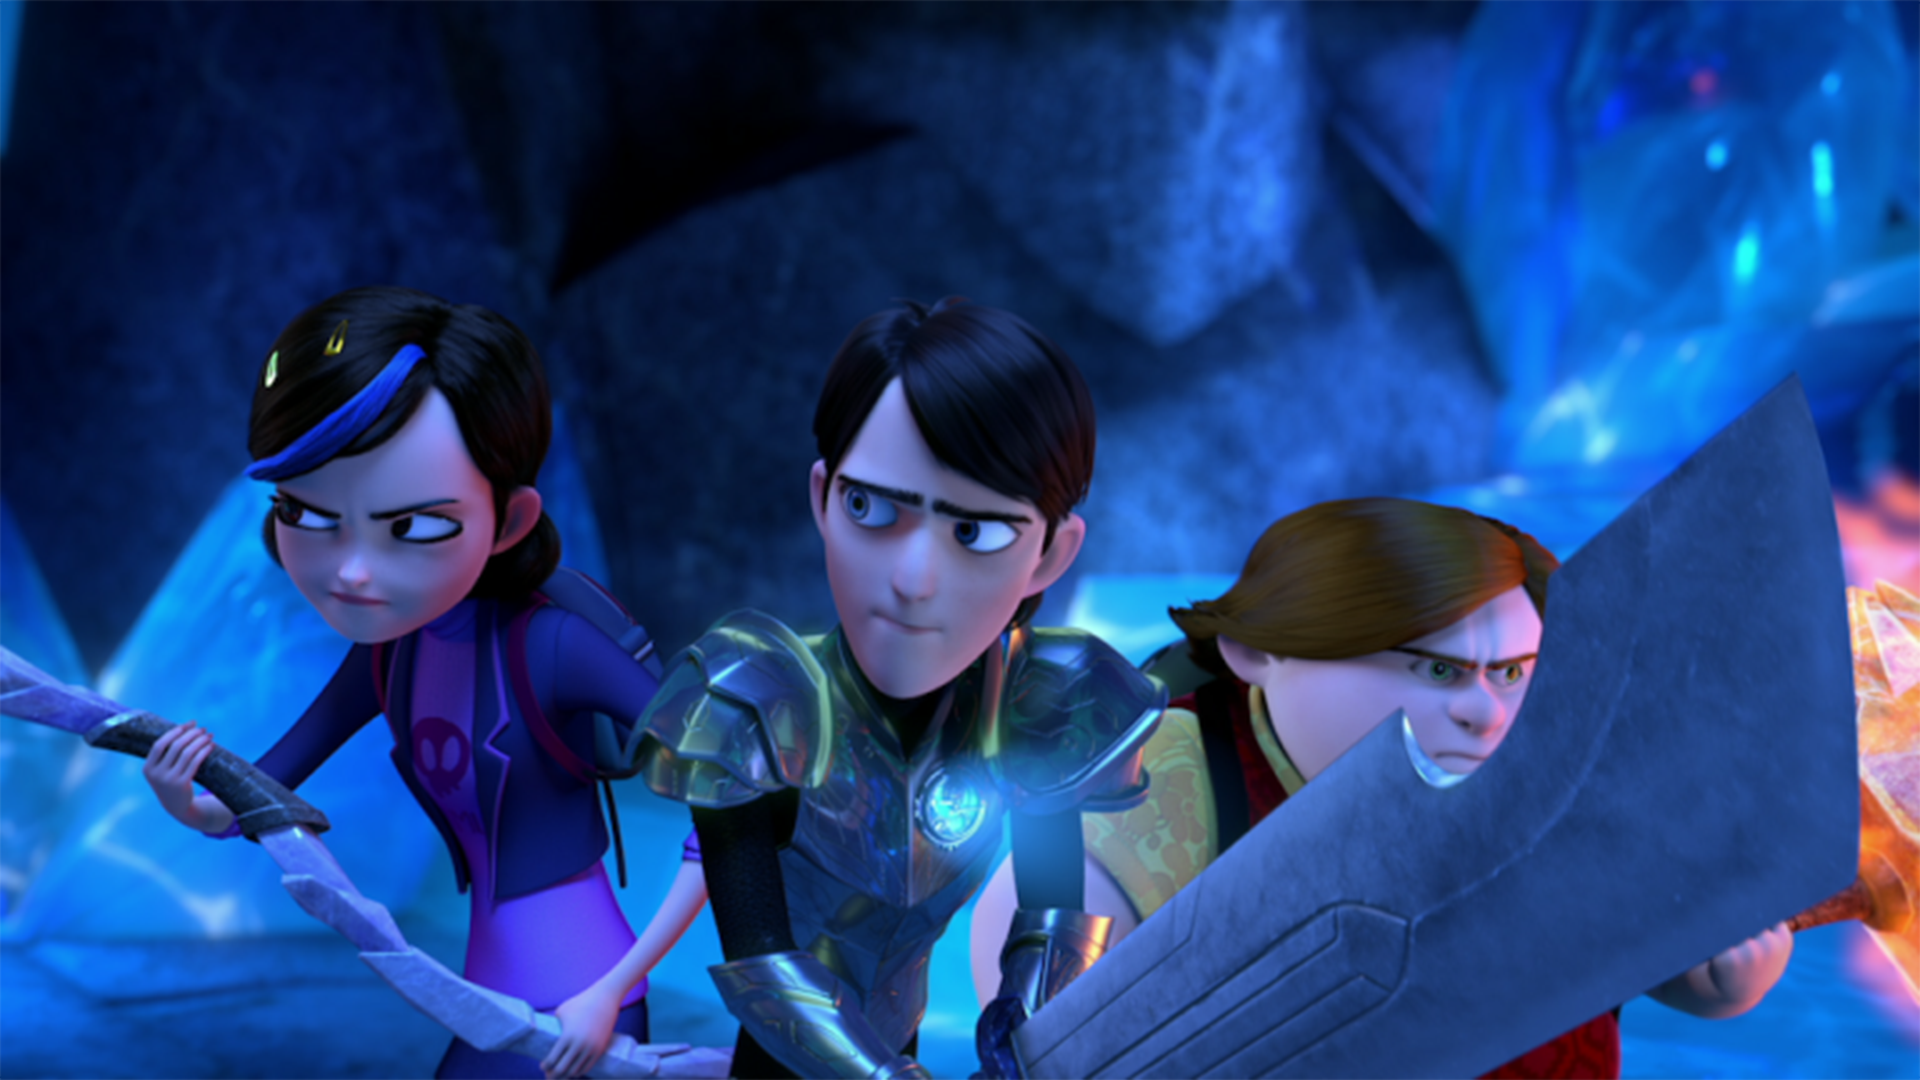 Trollhunters characters